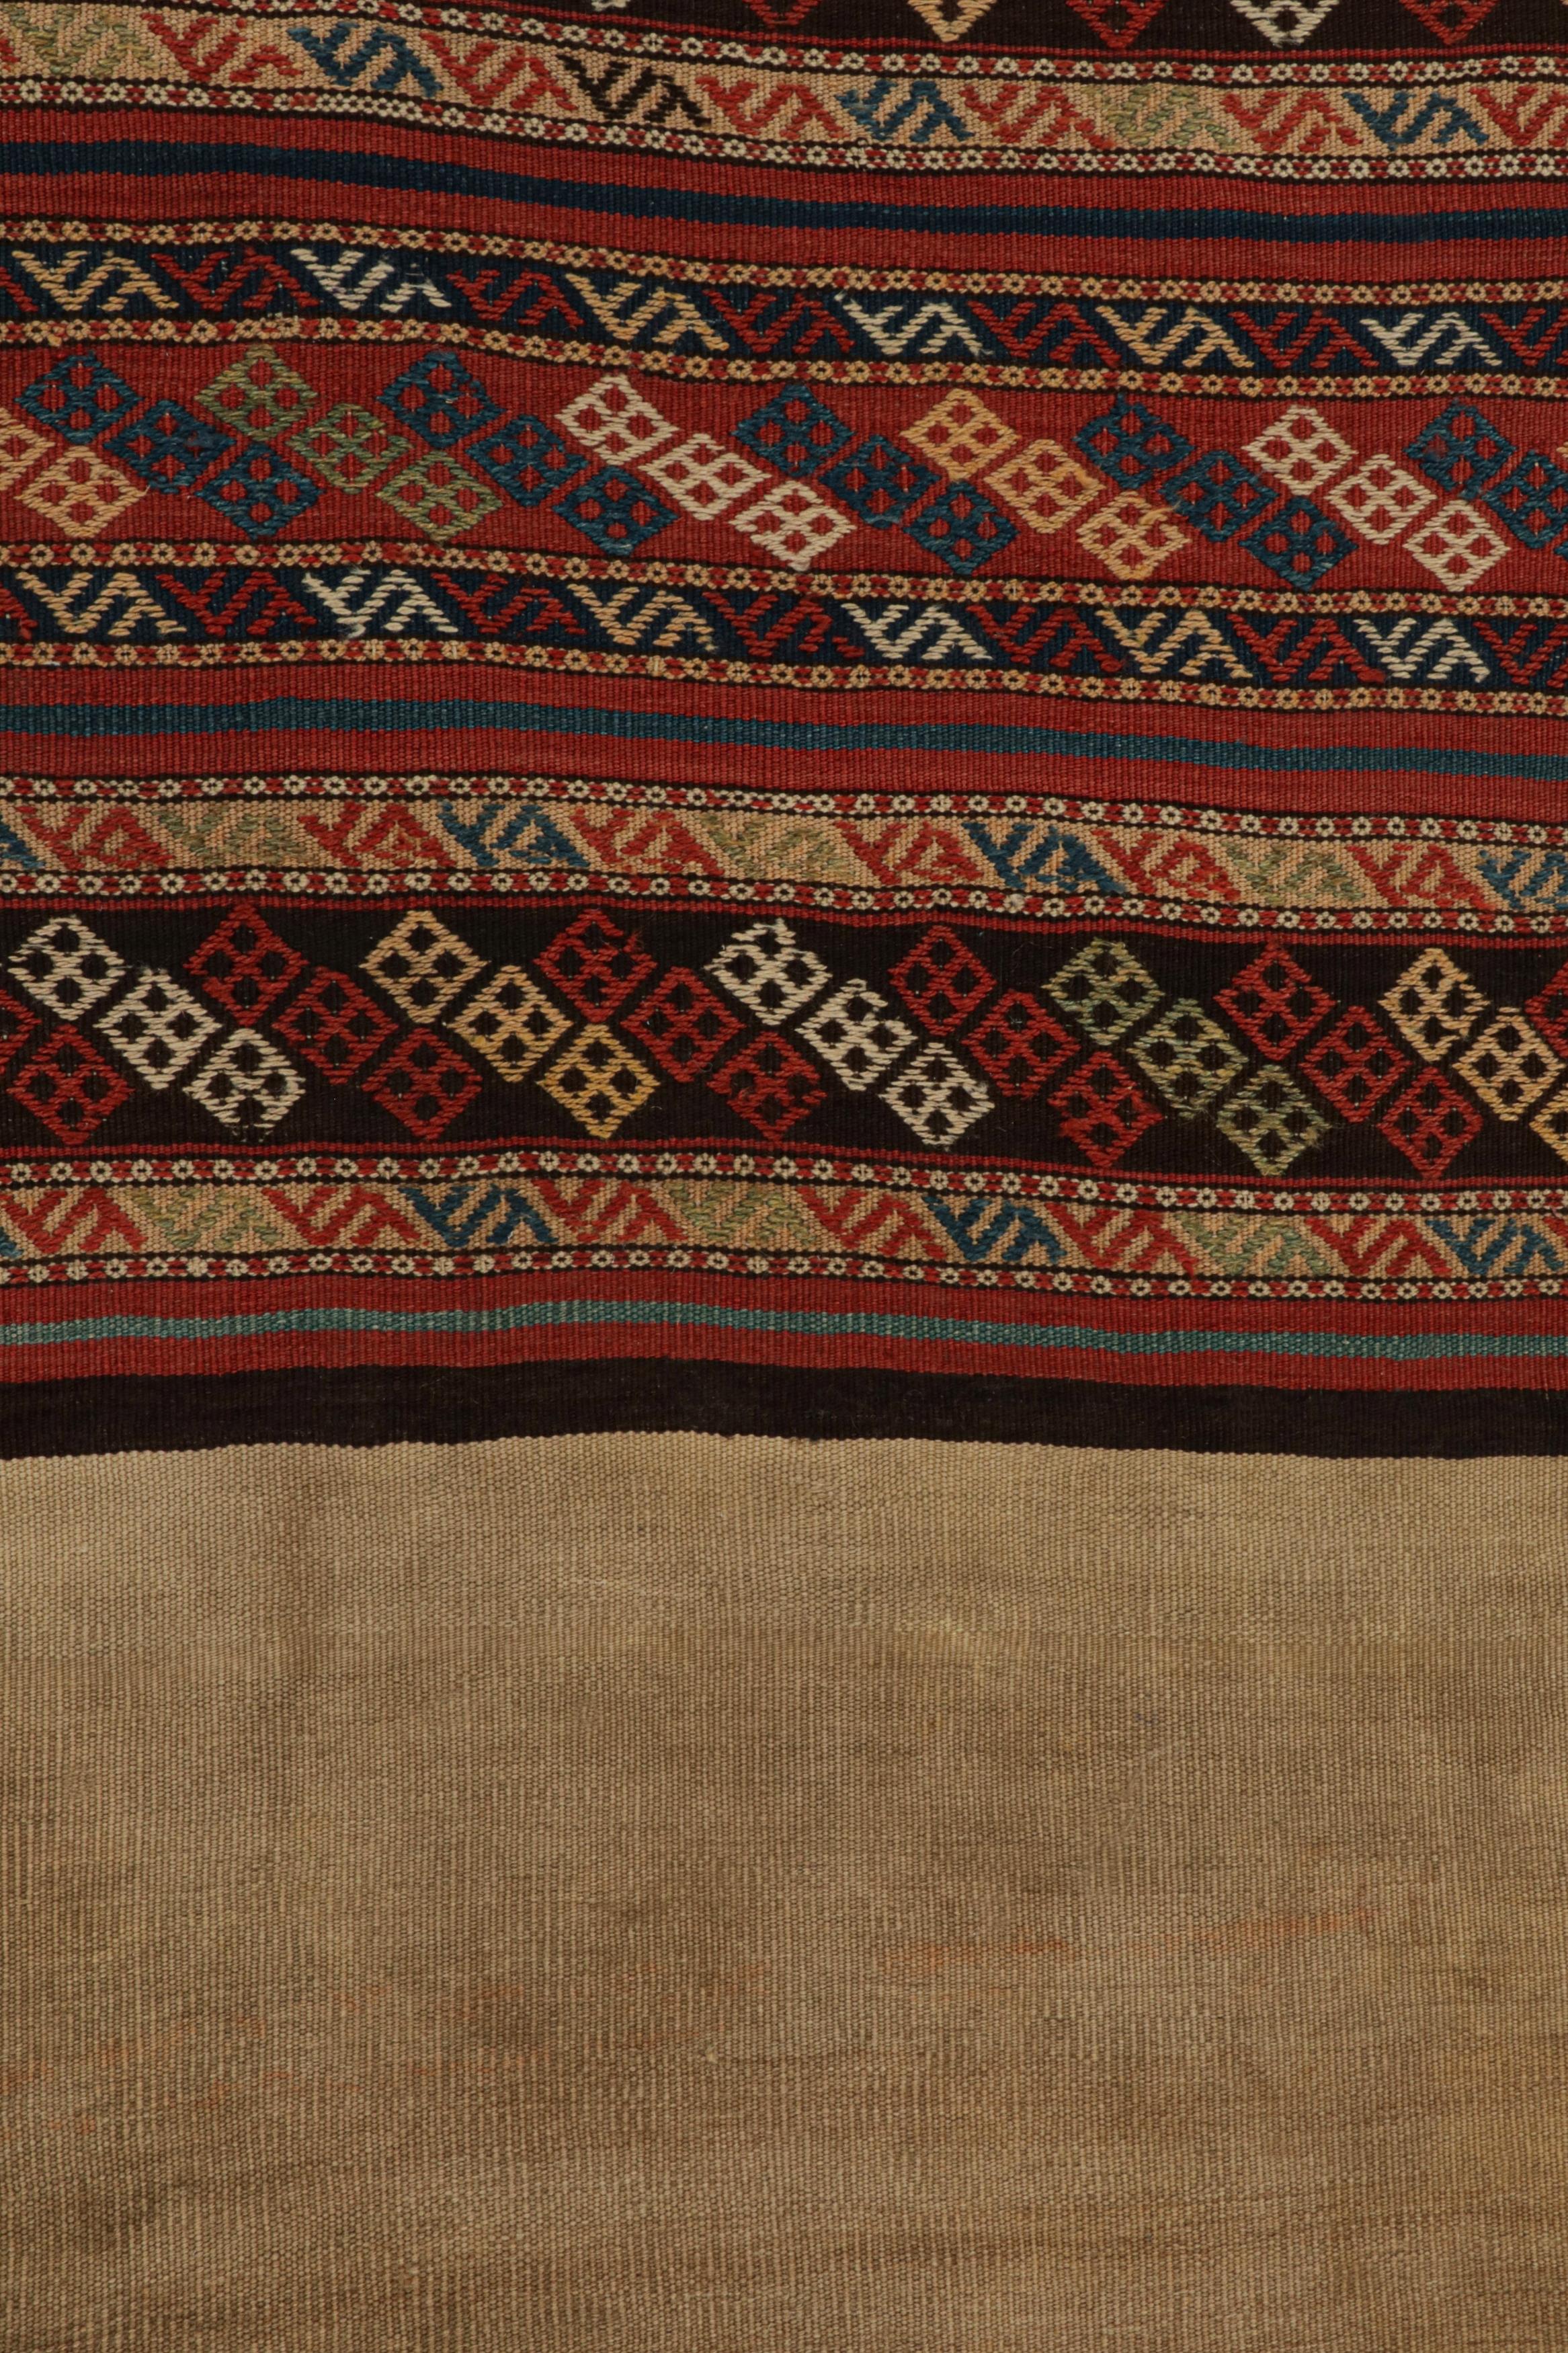 Early 20th Century Antique Persian Bag Kilim Runner with Geometric Patterns, from Rug & Kilim For Sale